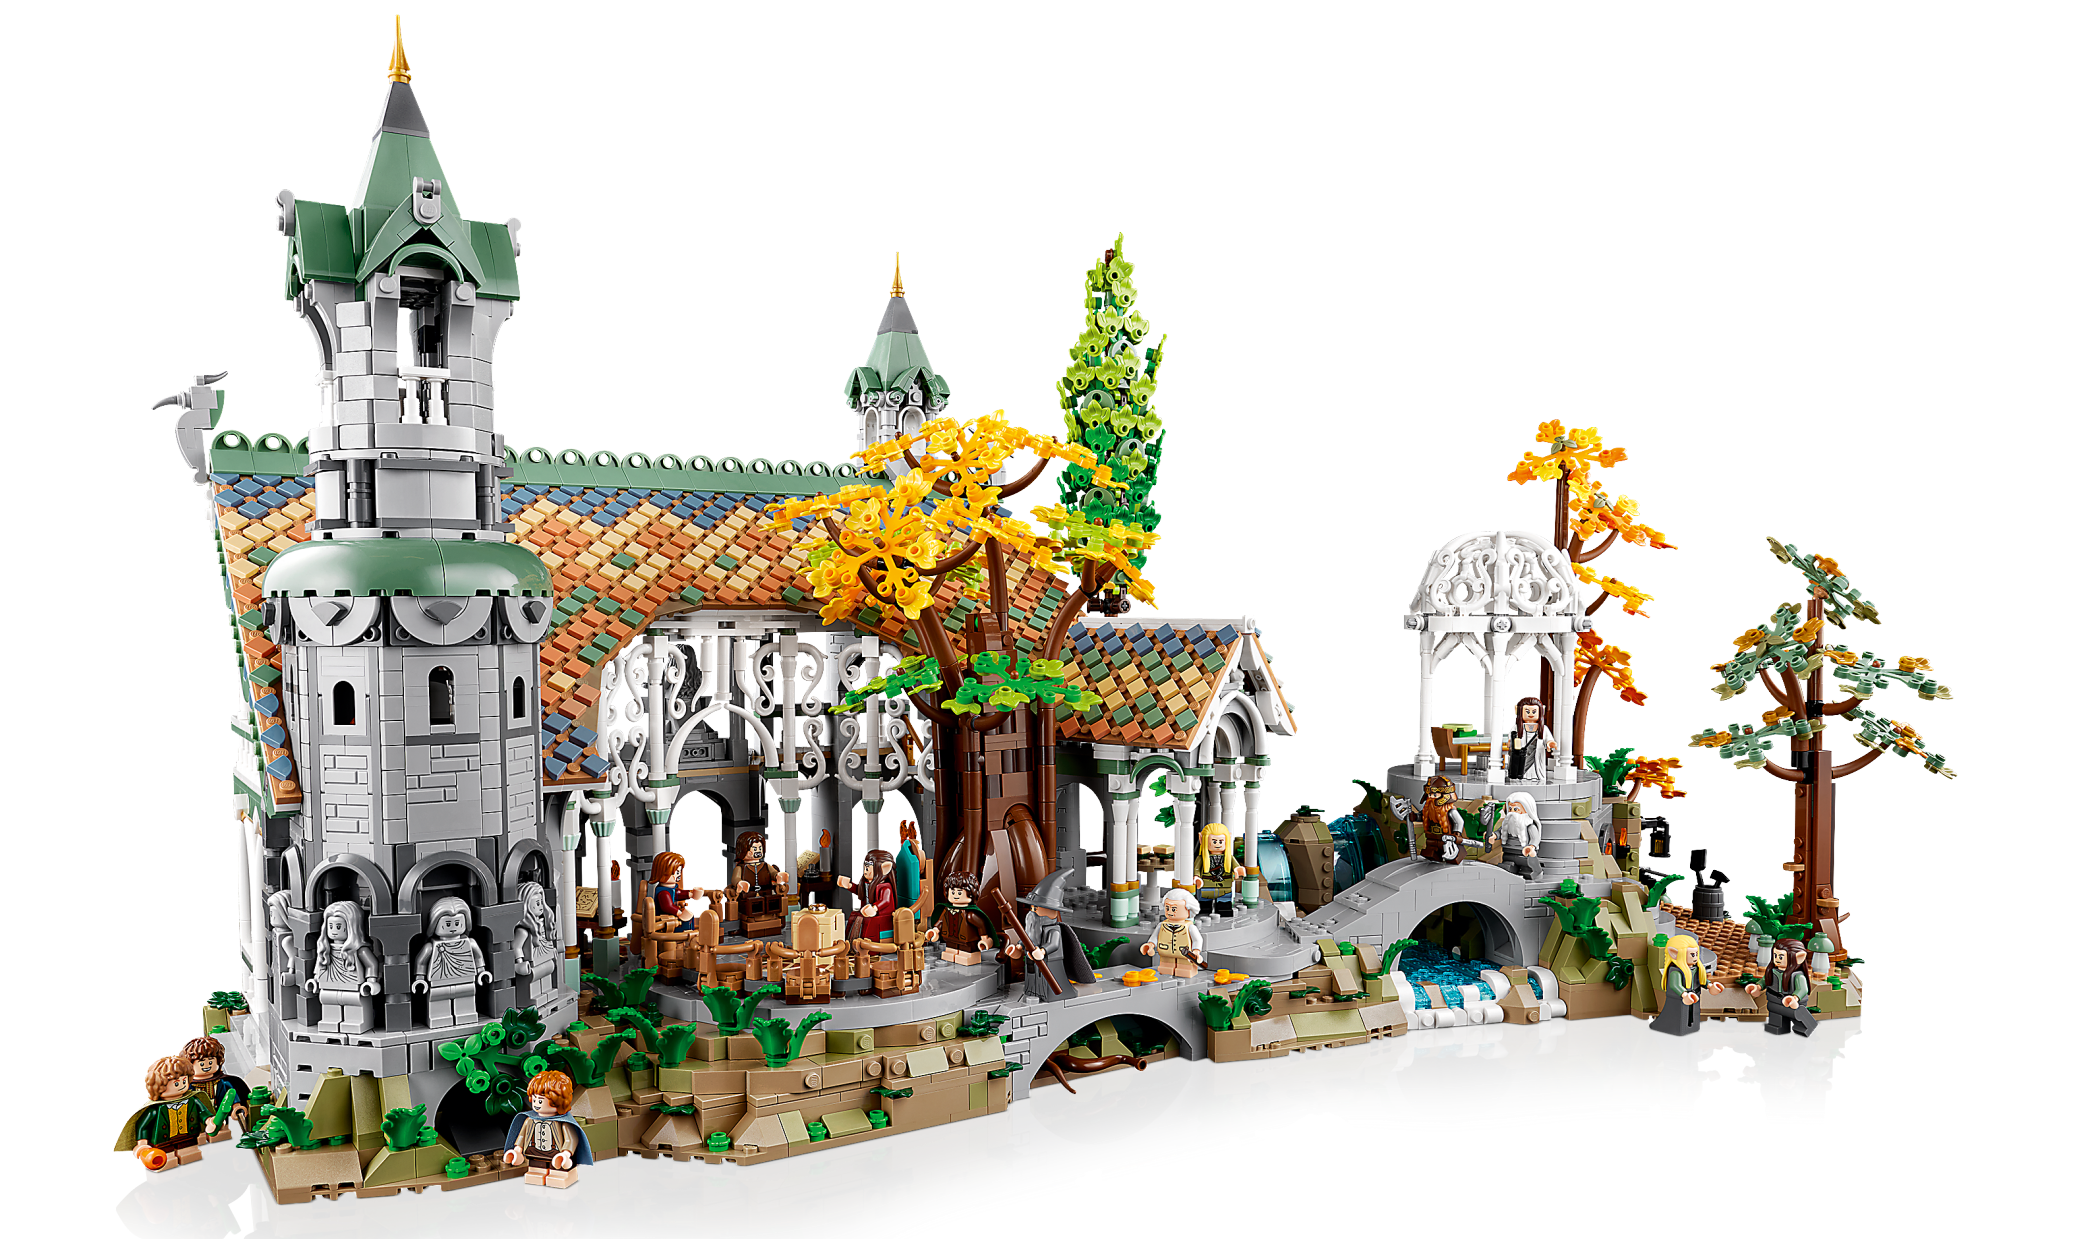 THE LORD OF THE RINGS: 10316 | Lord of the Rings™ | Buy online at the Official LEGO® Shop US